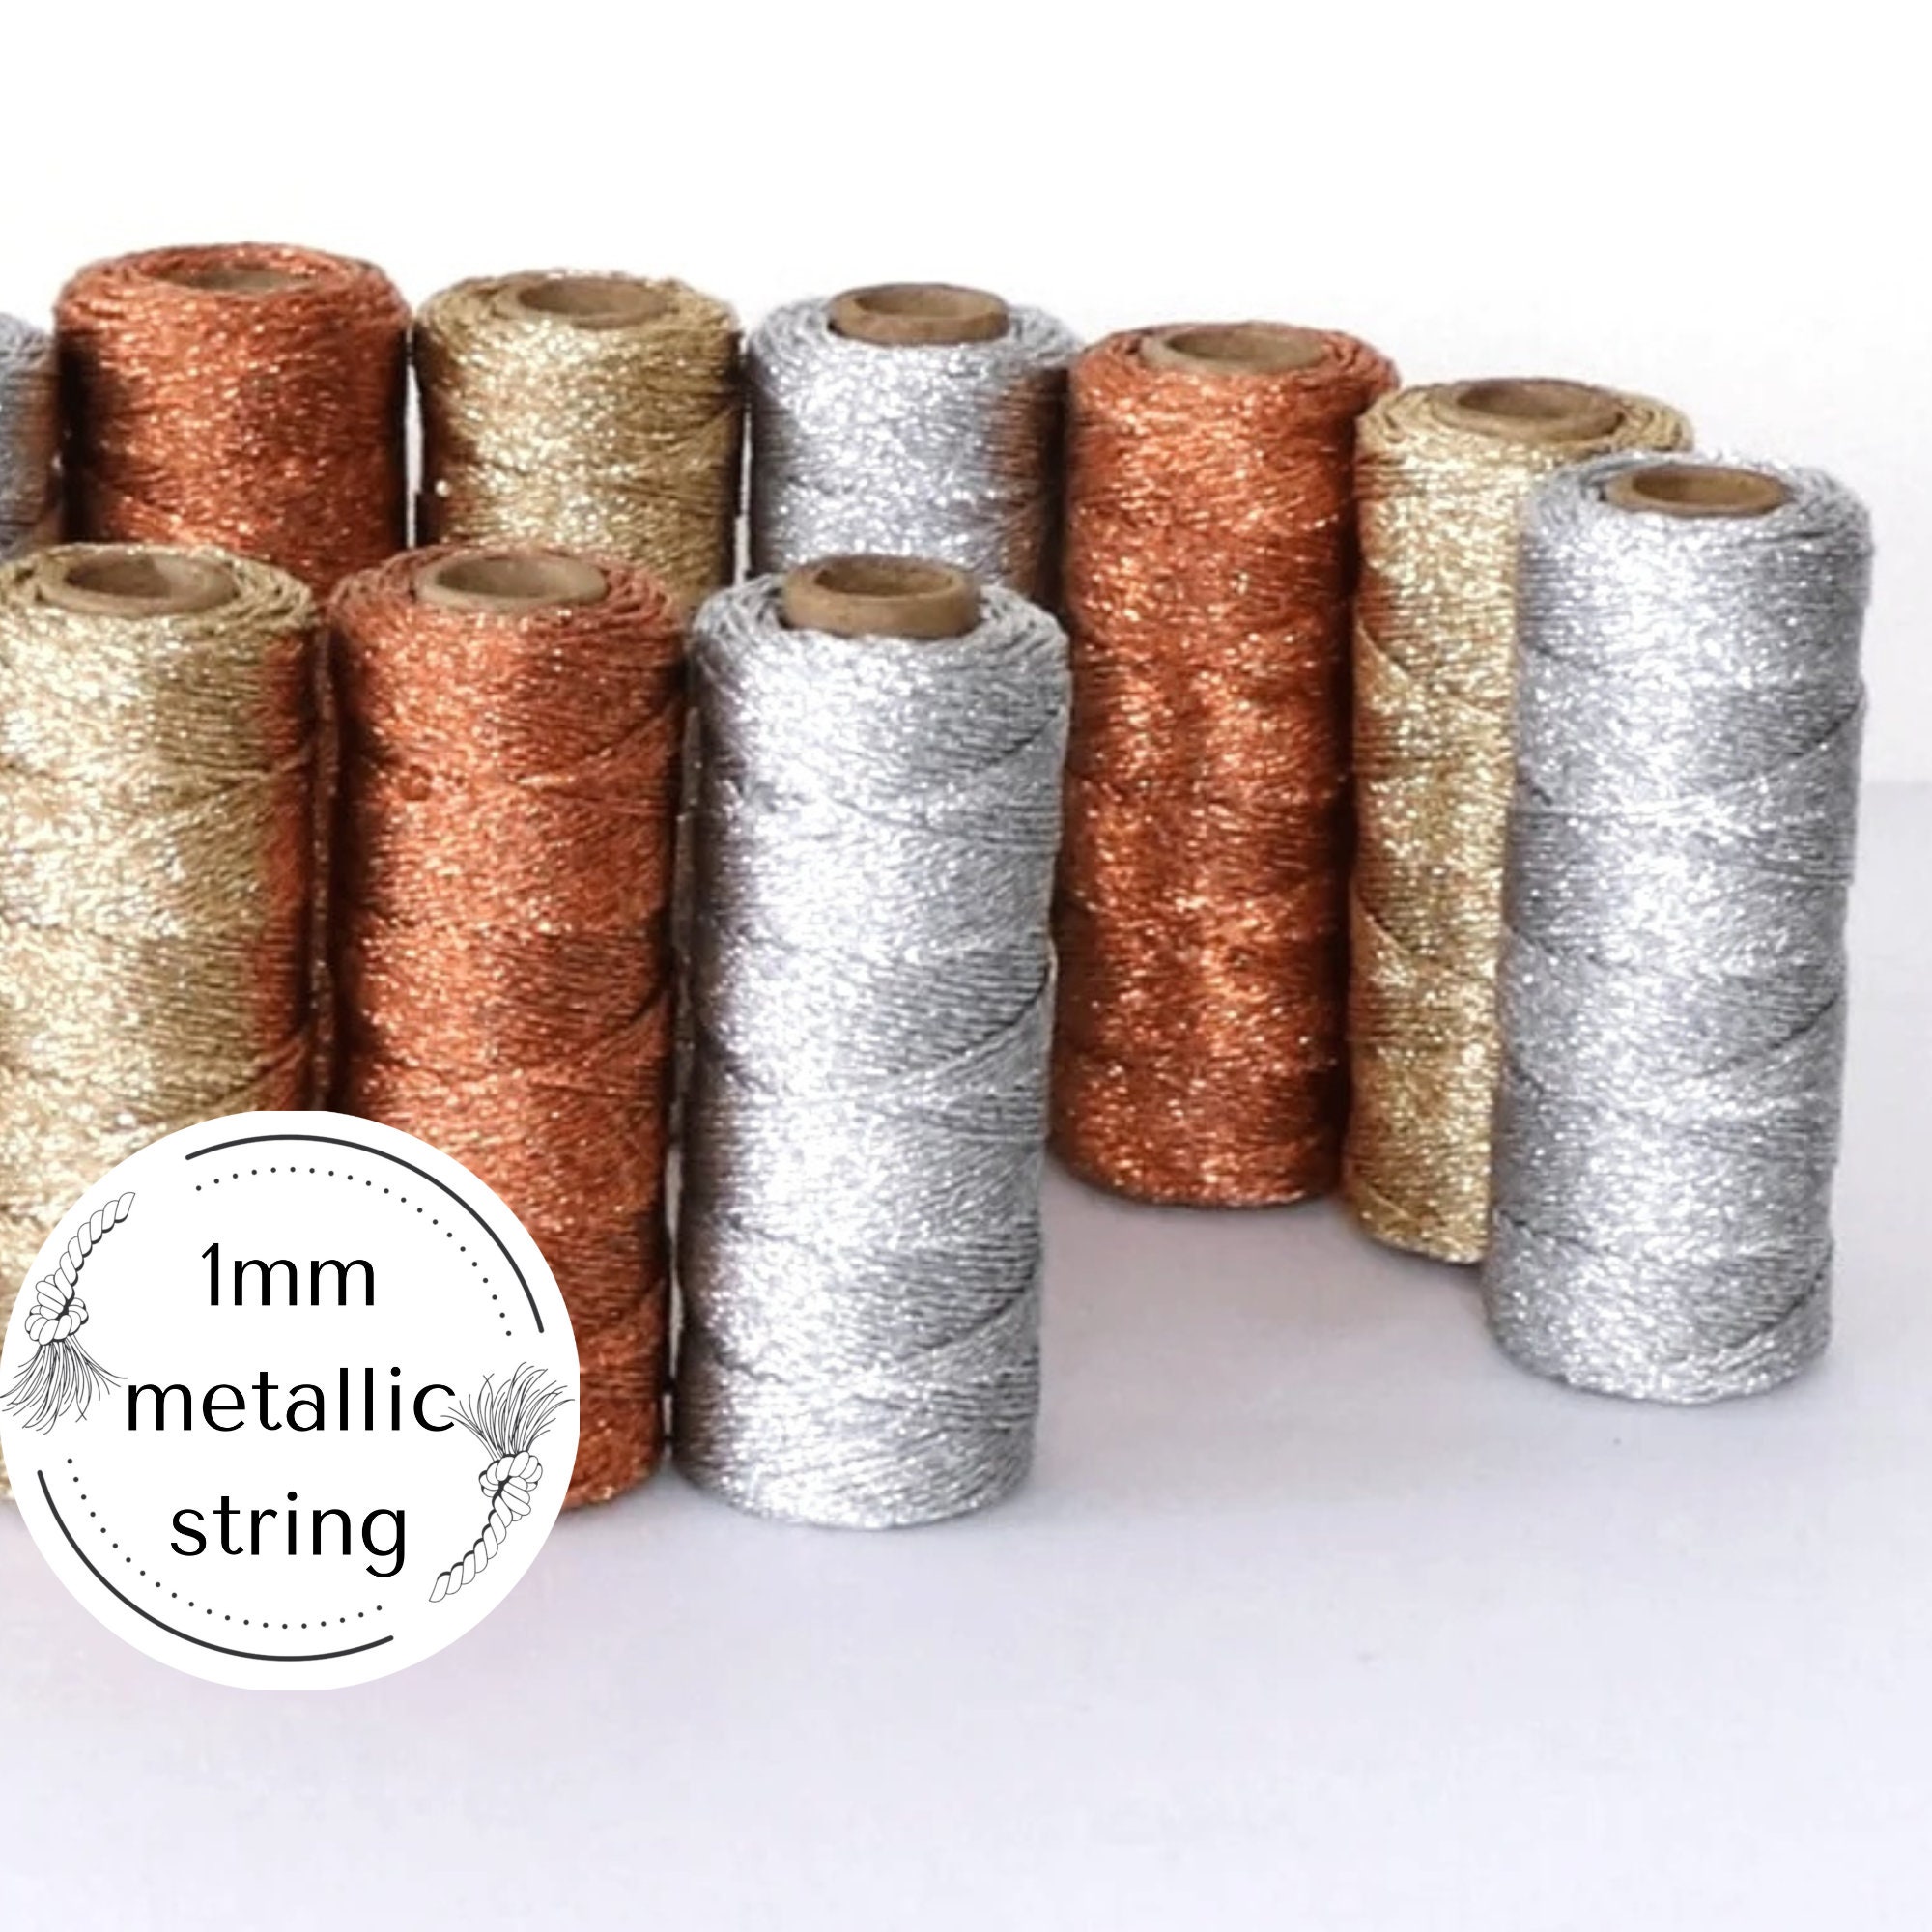 9 Rolls Beading gold wire copper yarns of DIY Wires Bead String